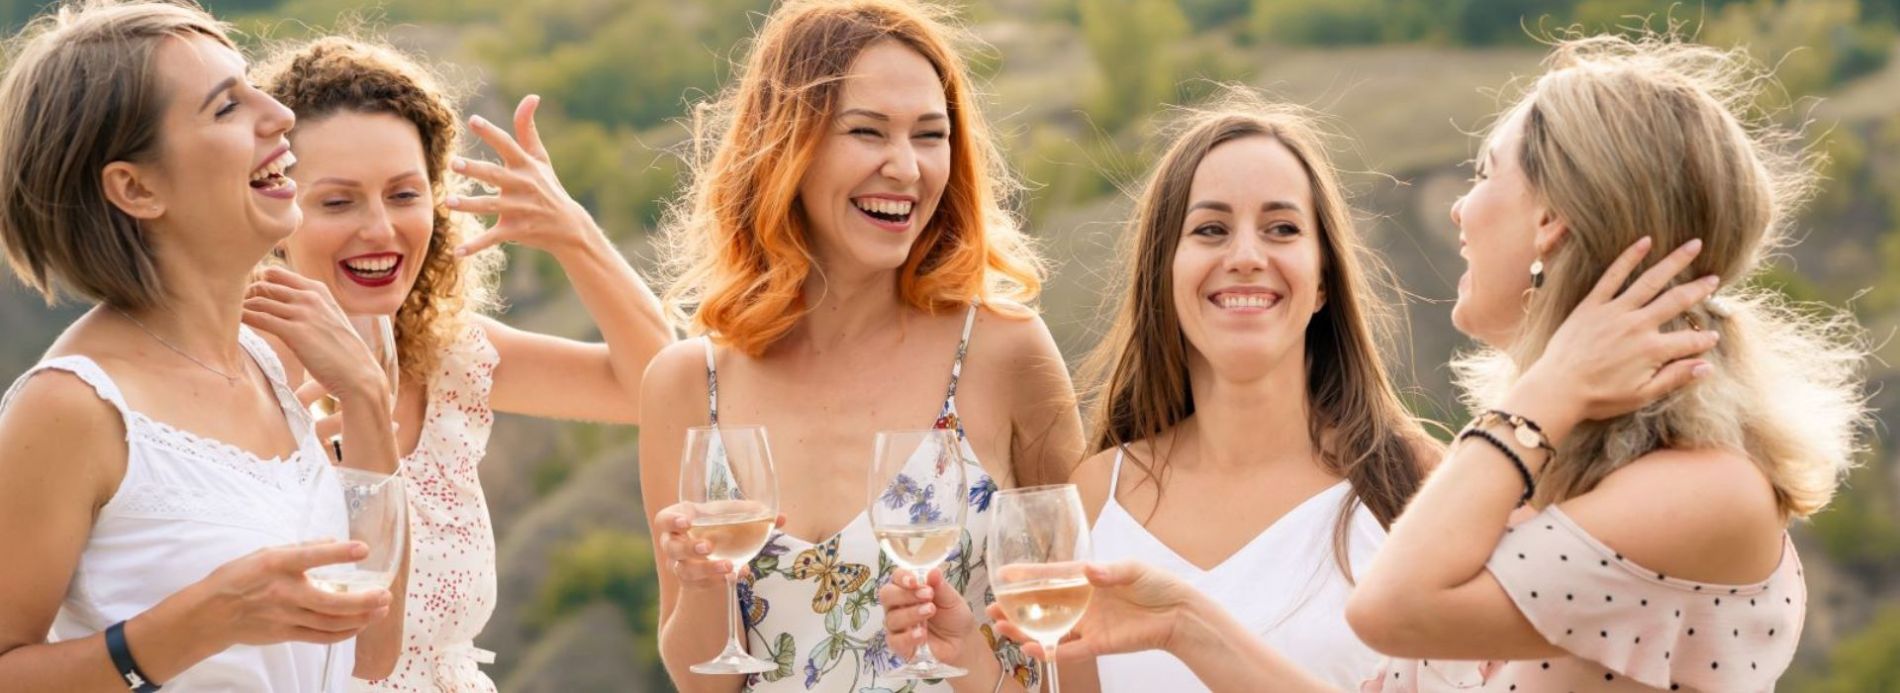 Plan the Perfect Virginia Bachelorette Party in Virginia Wine Country Feature Image